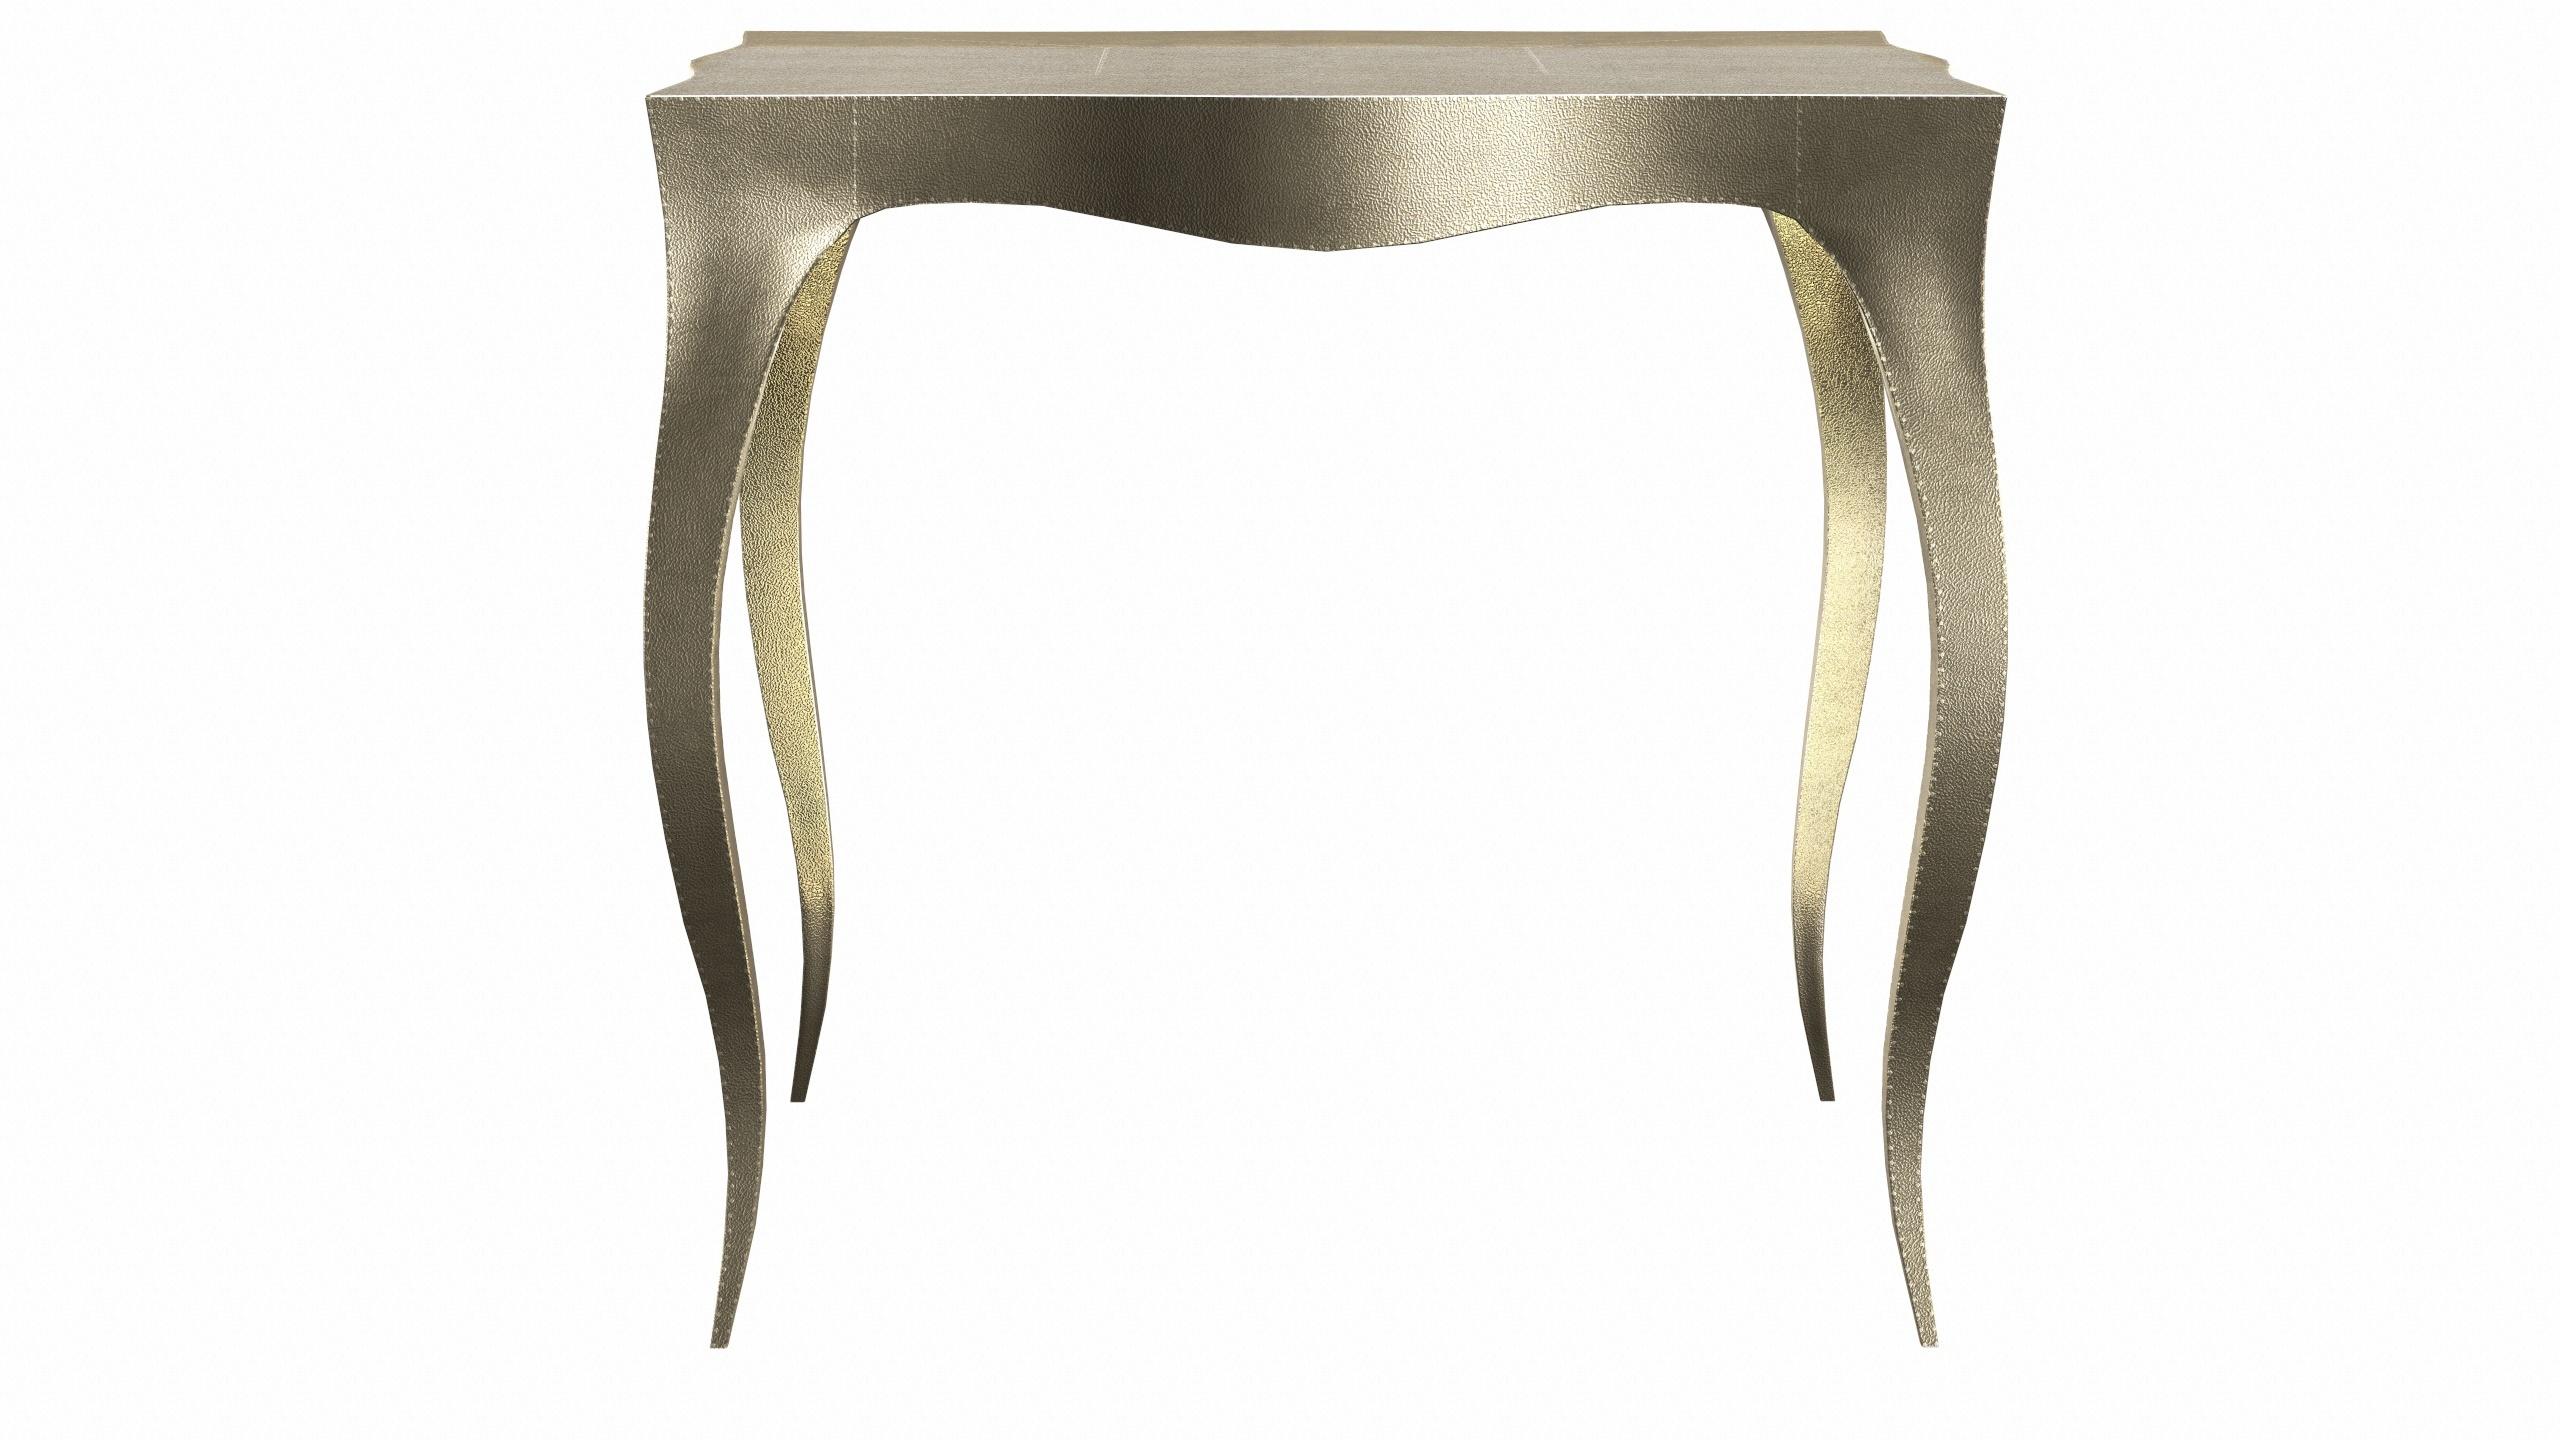 Hand-Carved Louise Art Deco Nesting Tables and Crad Tables in Fine Hammered Brass by Paul M. For Sale